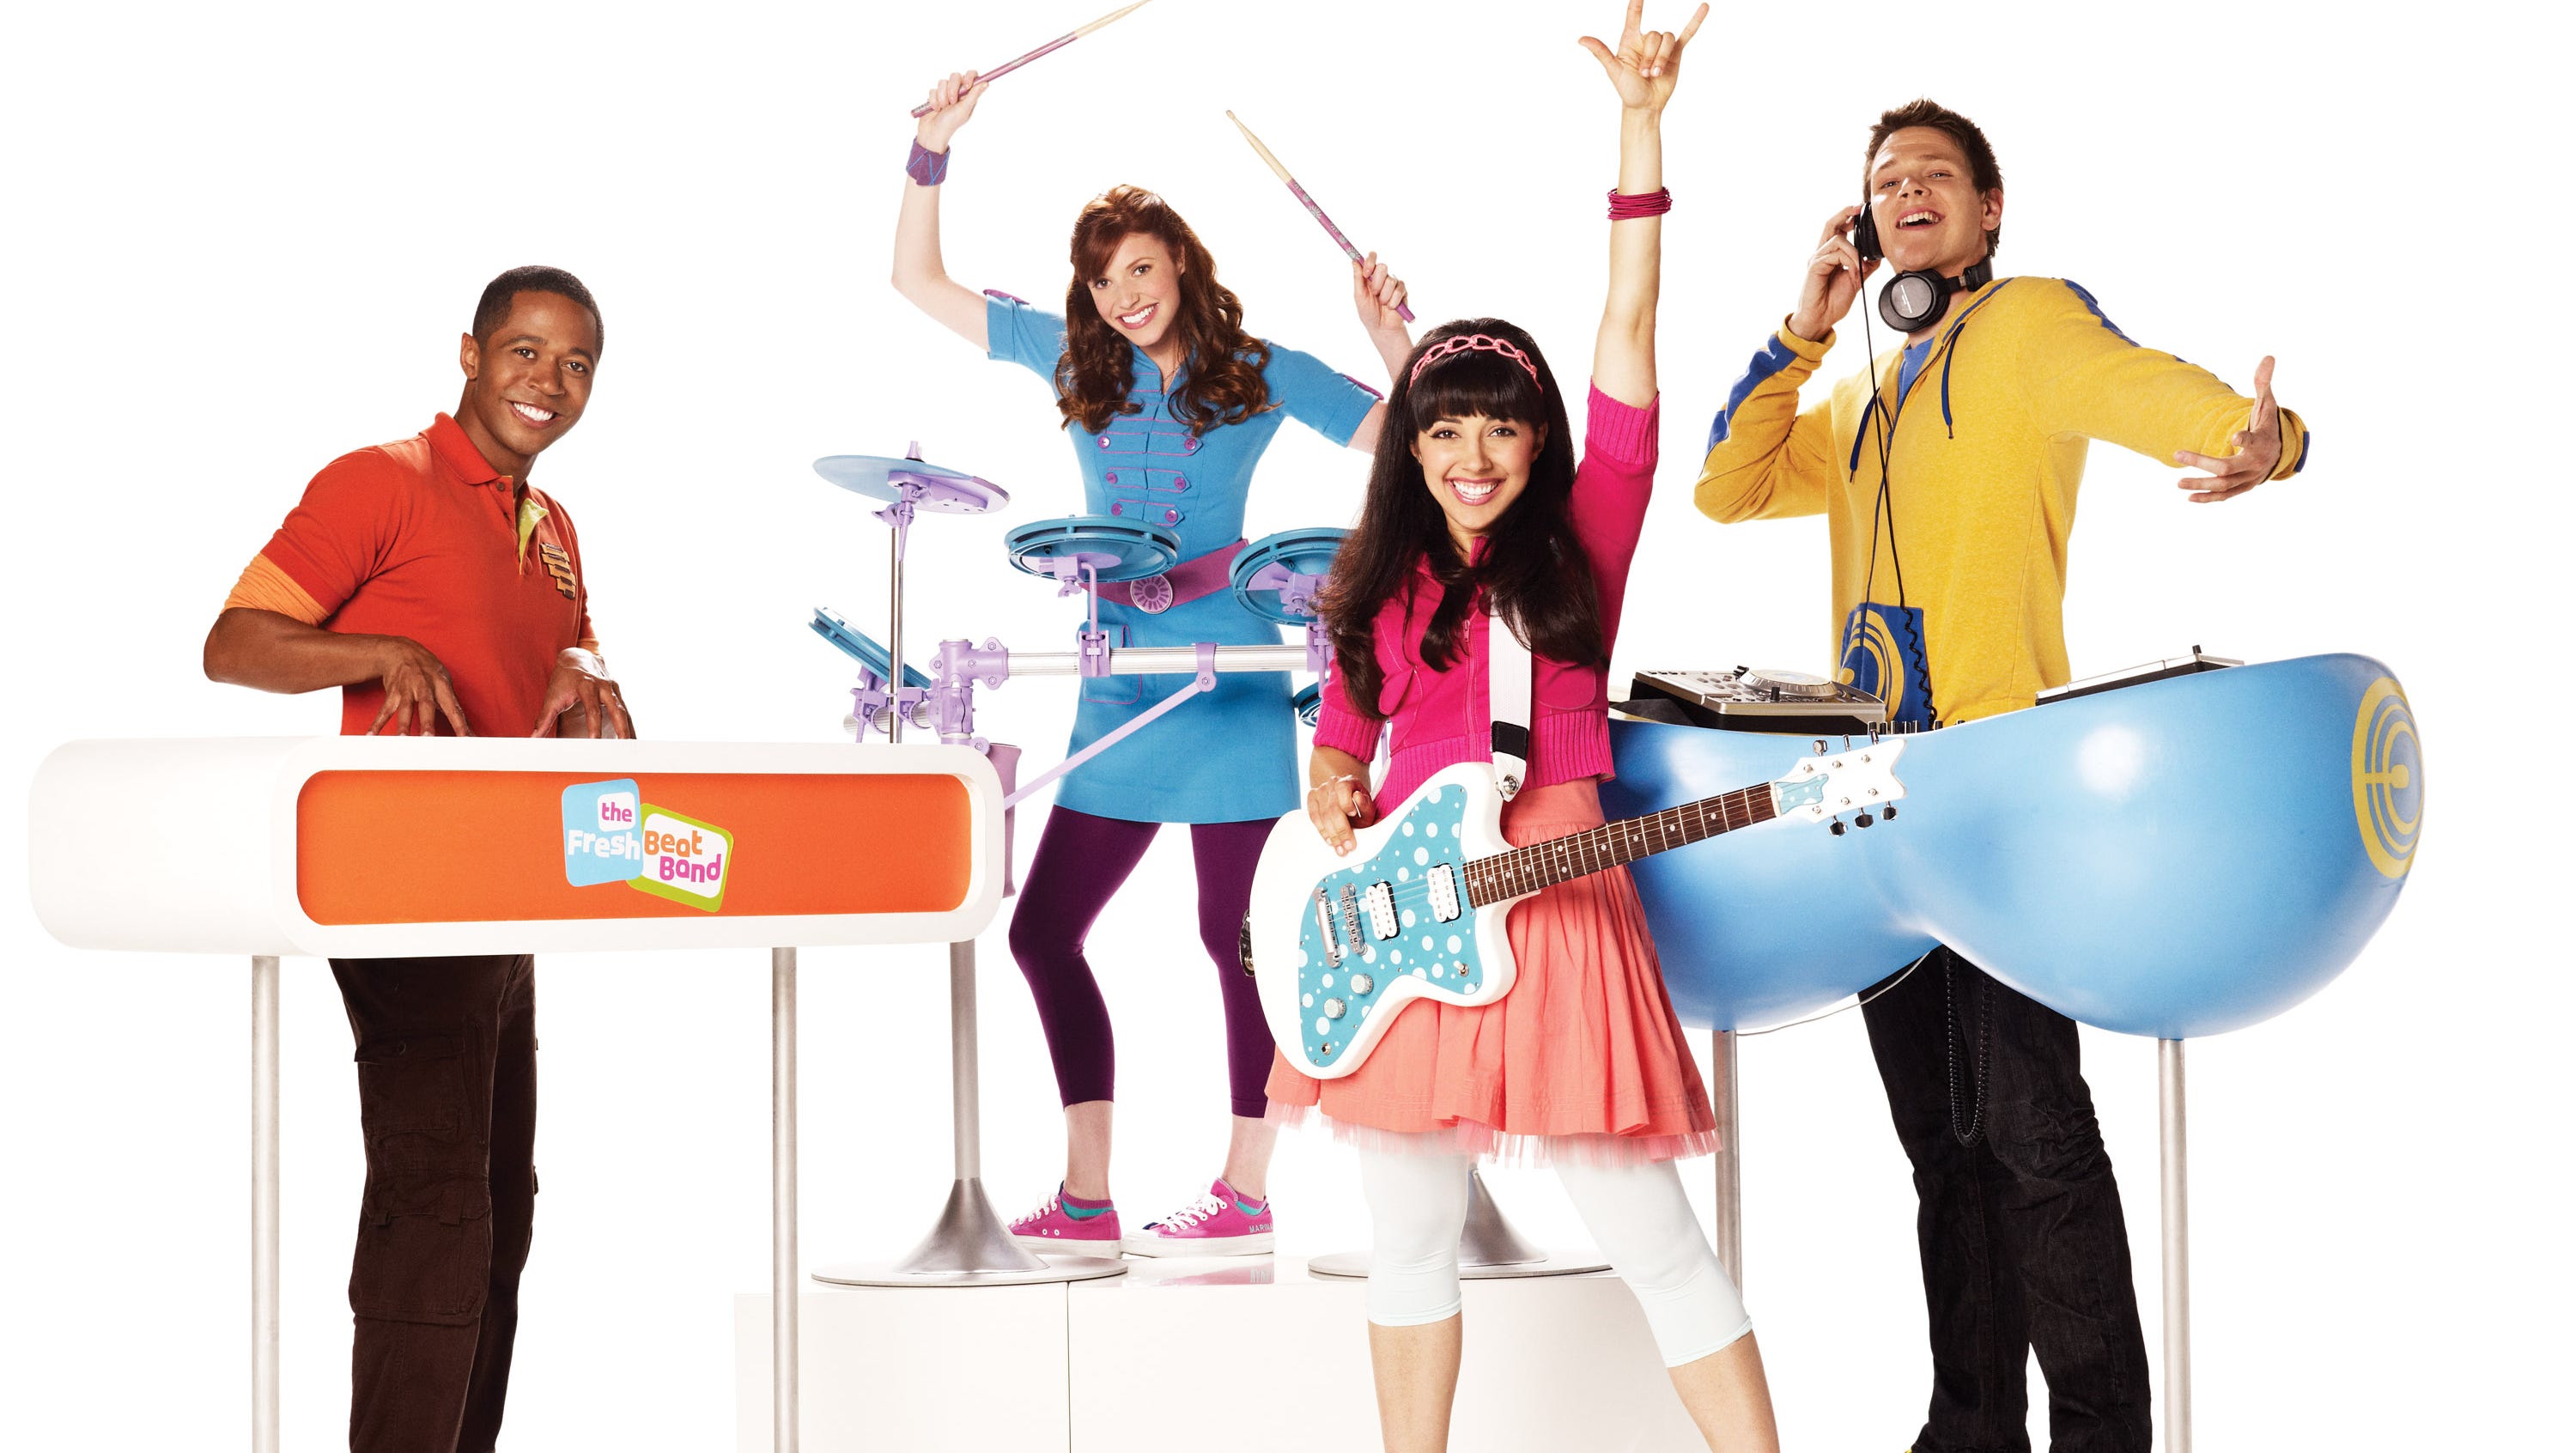 Exclusive Nickelodeon's Fresh Beat Band to go on tour